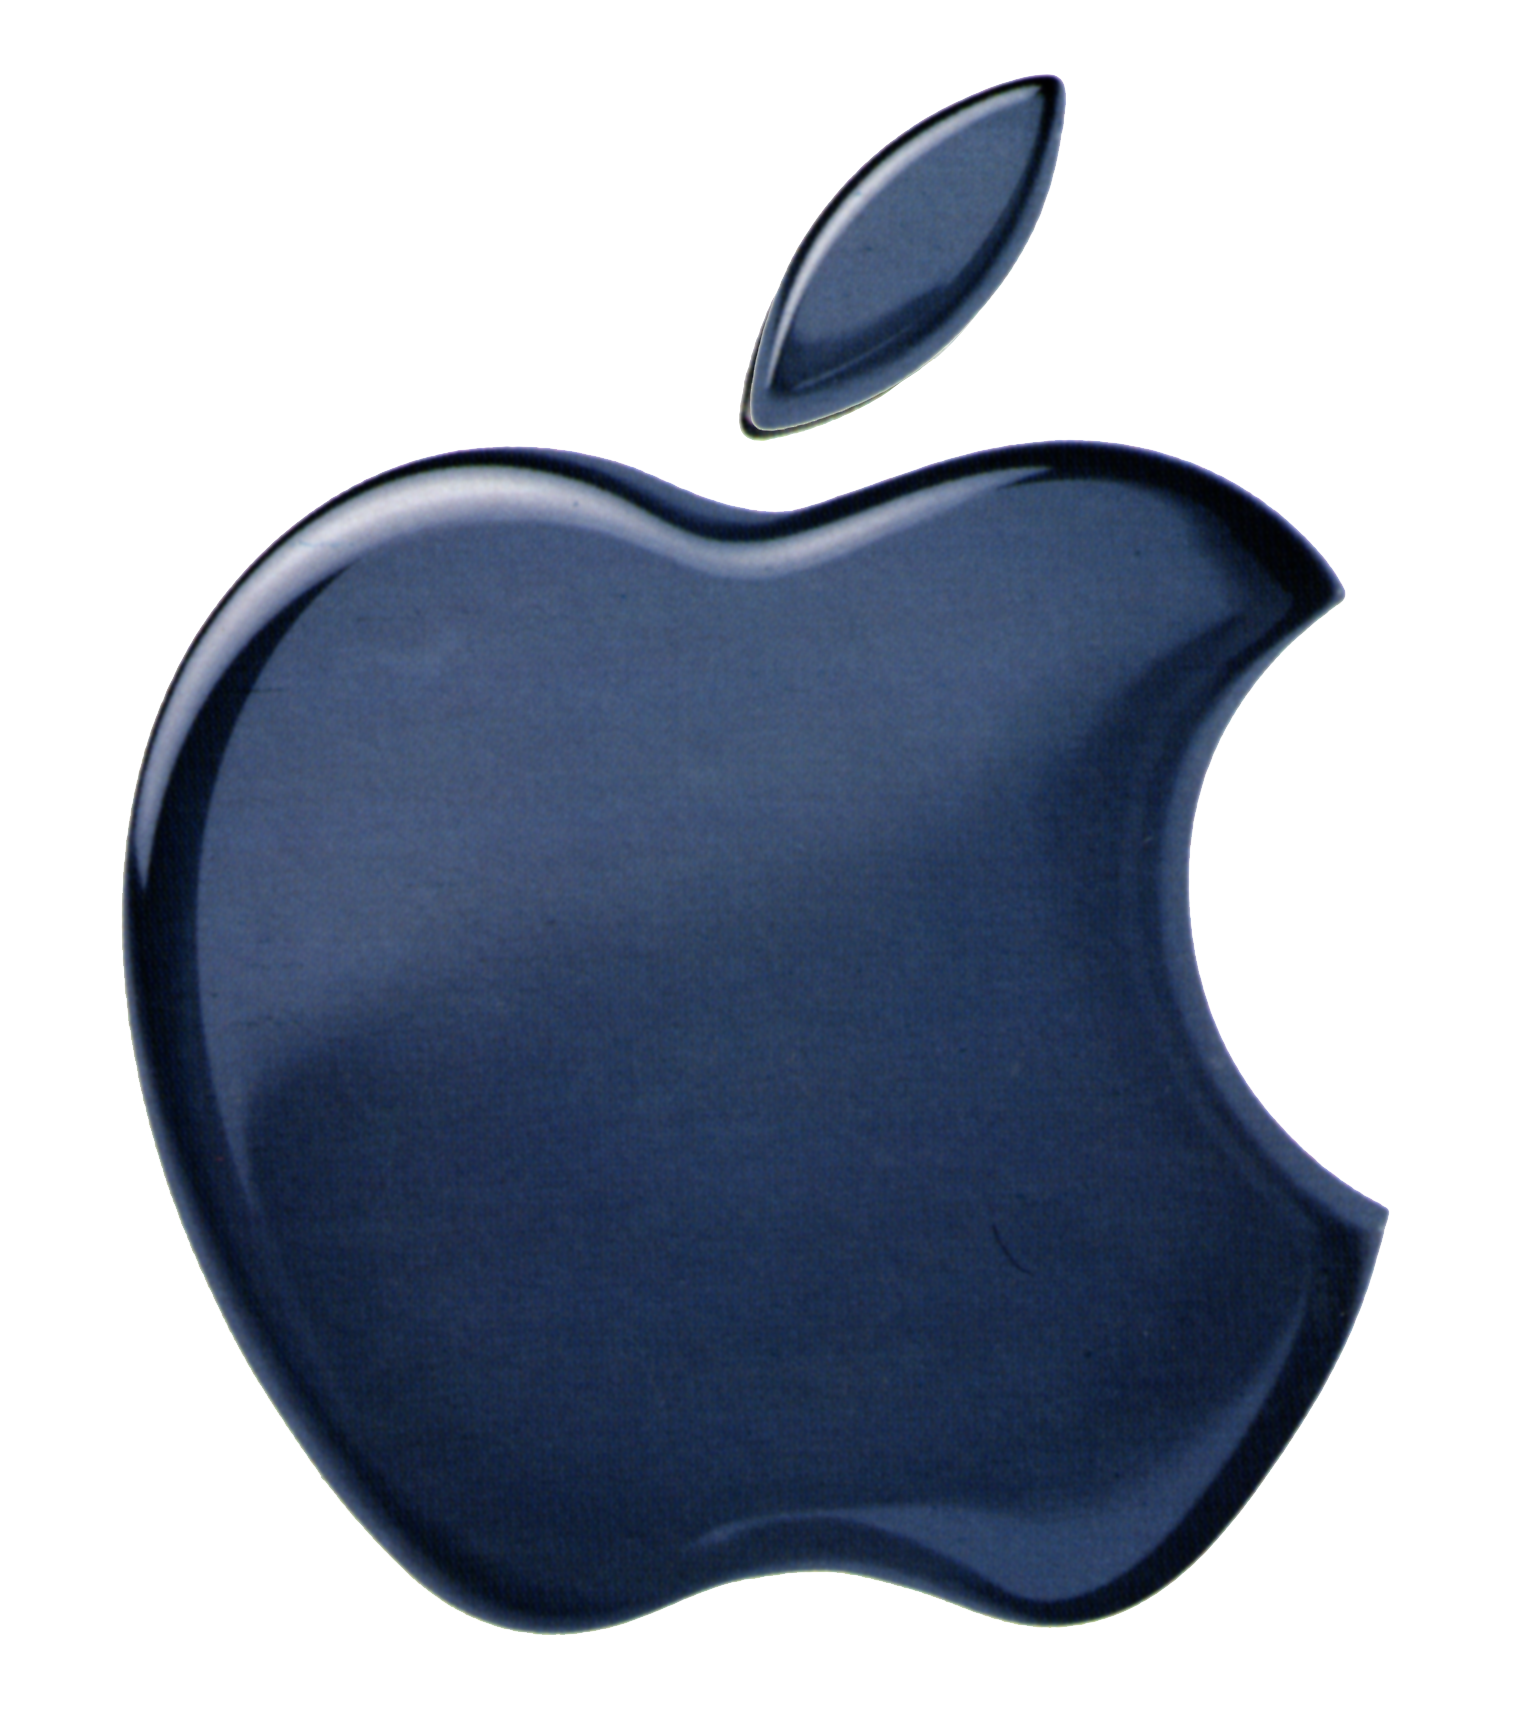 Apple Logo Clipart - Cliparts and Others Art Inspiration